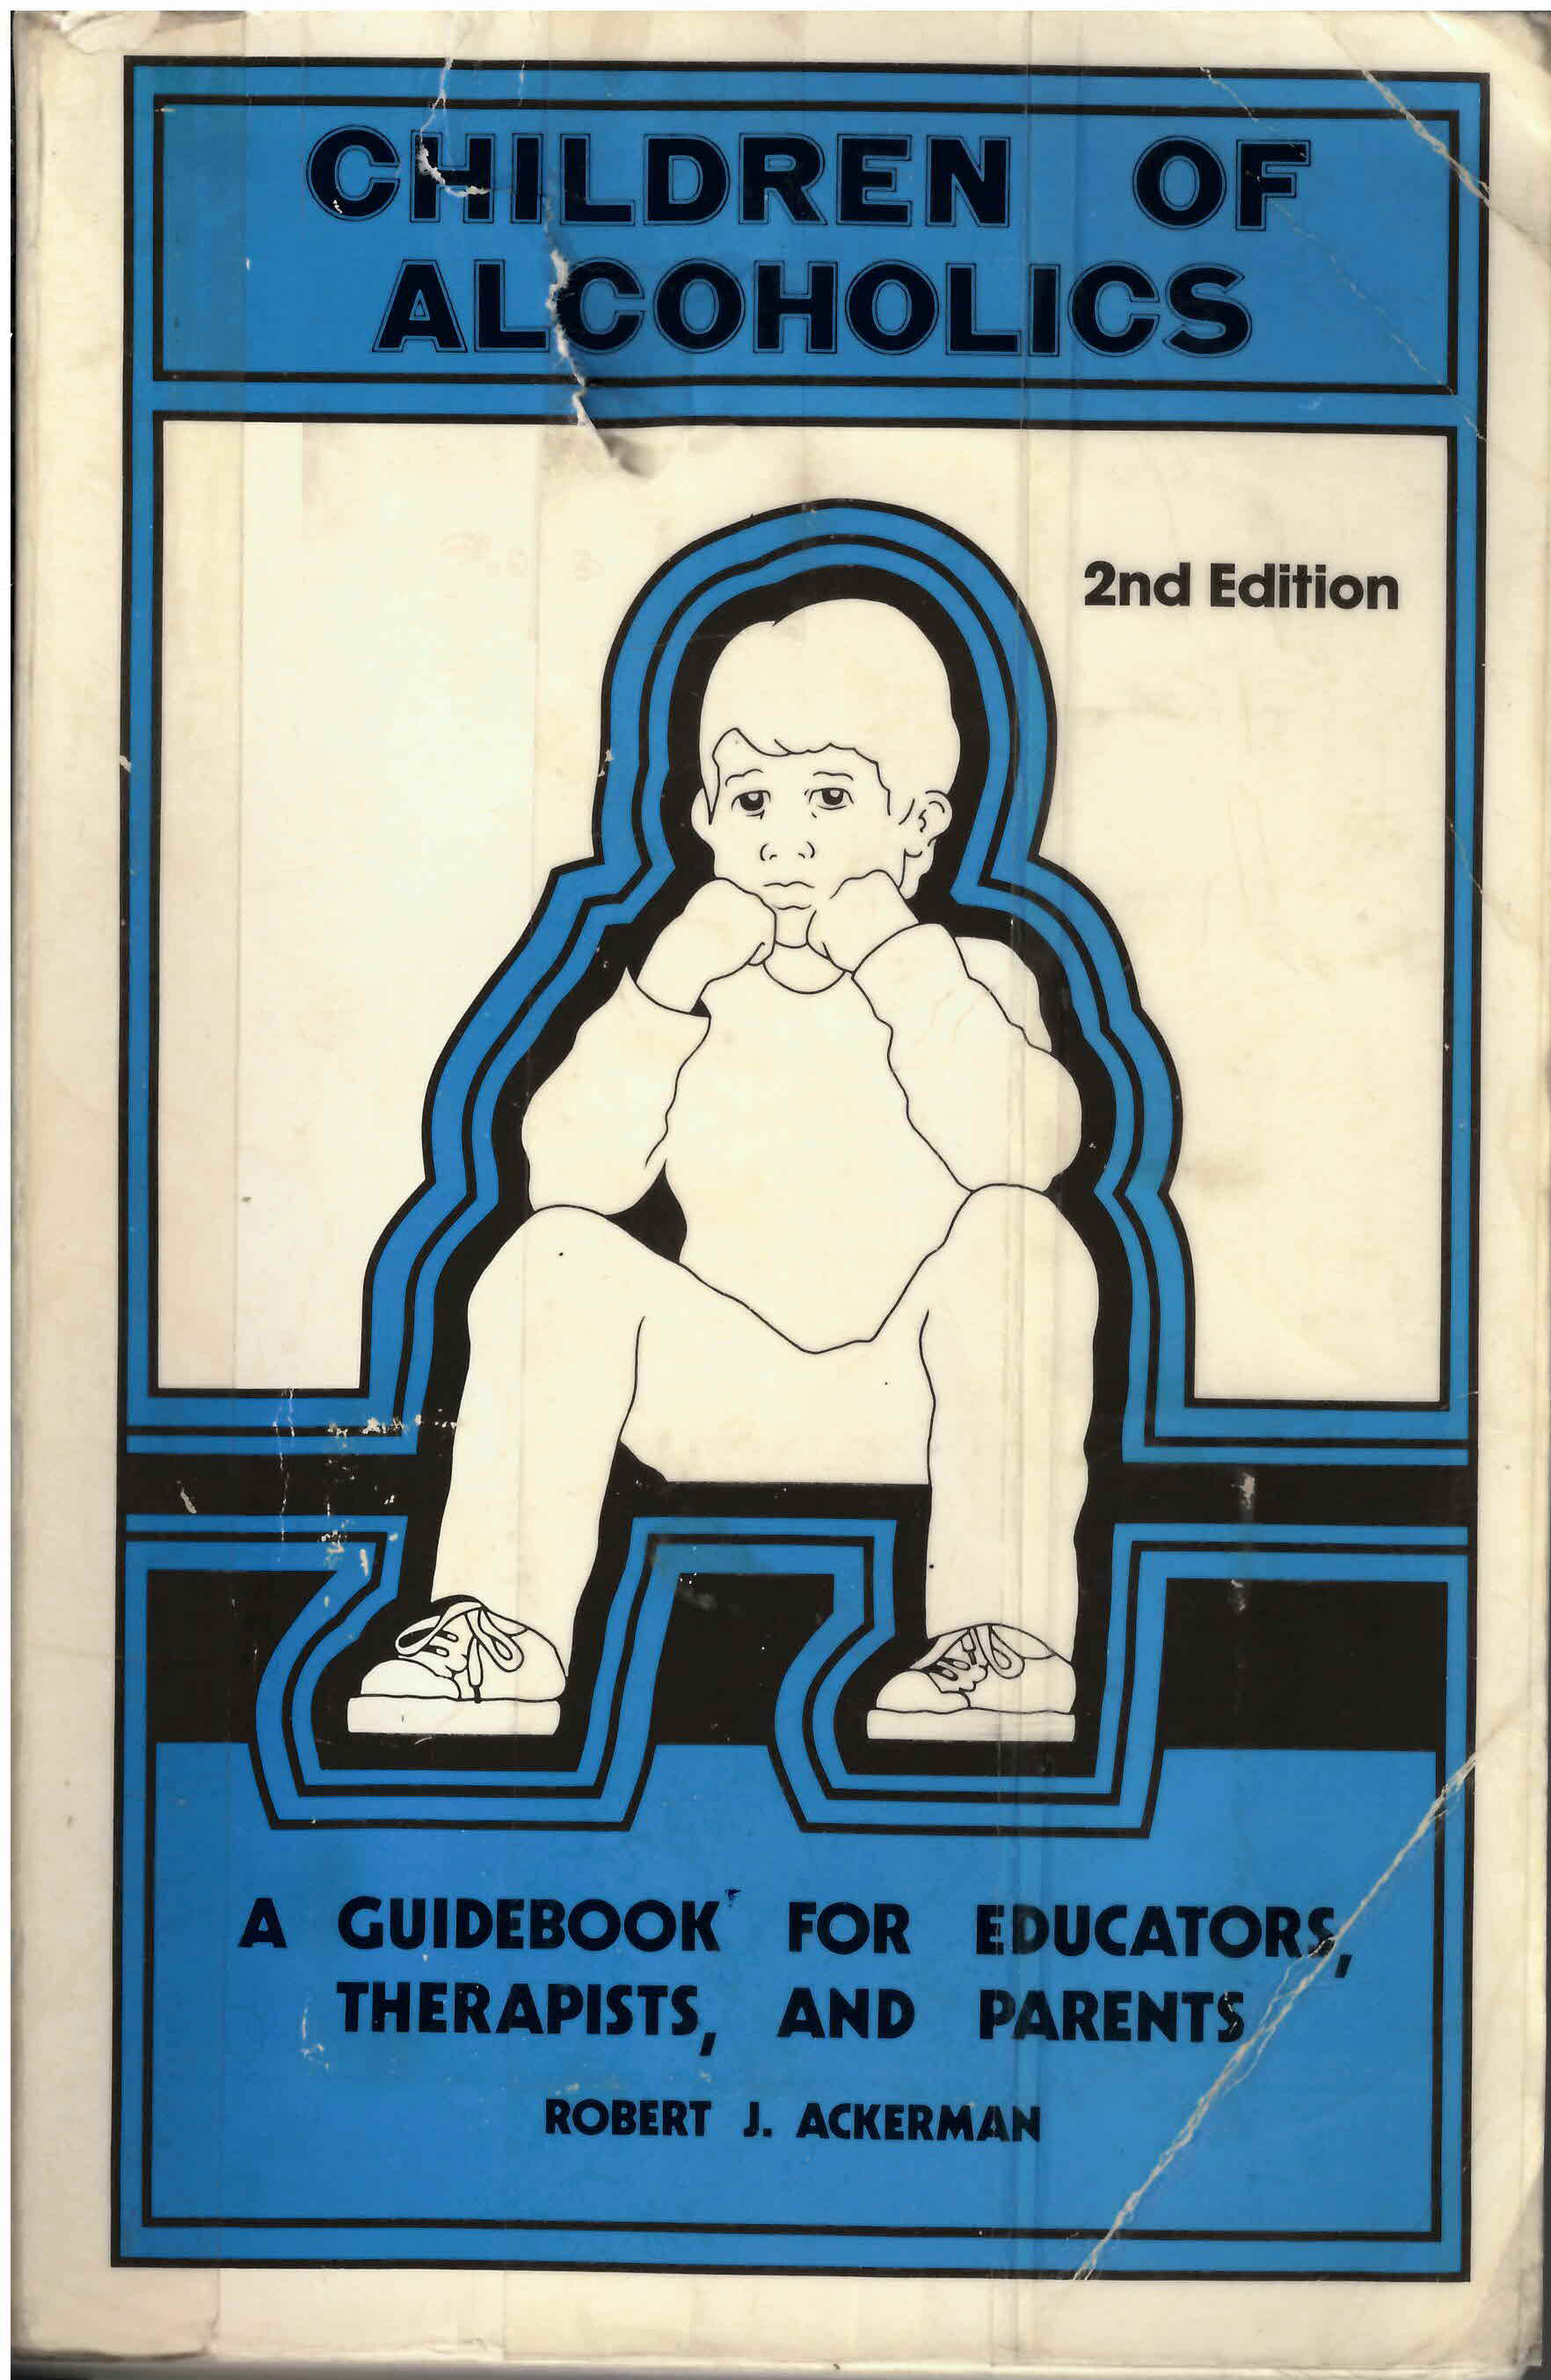 Children of alcoholics : guidebook for educators, therapists,  and parents